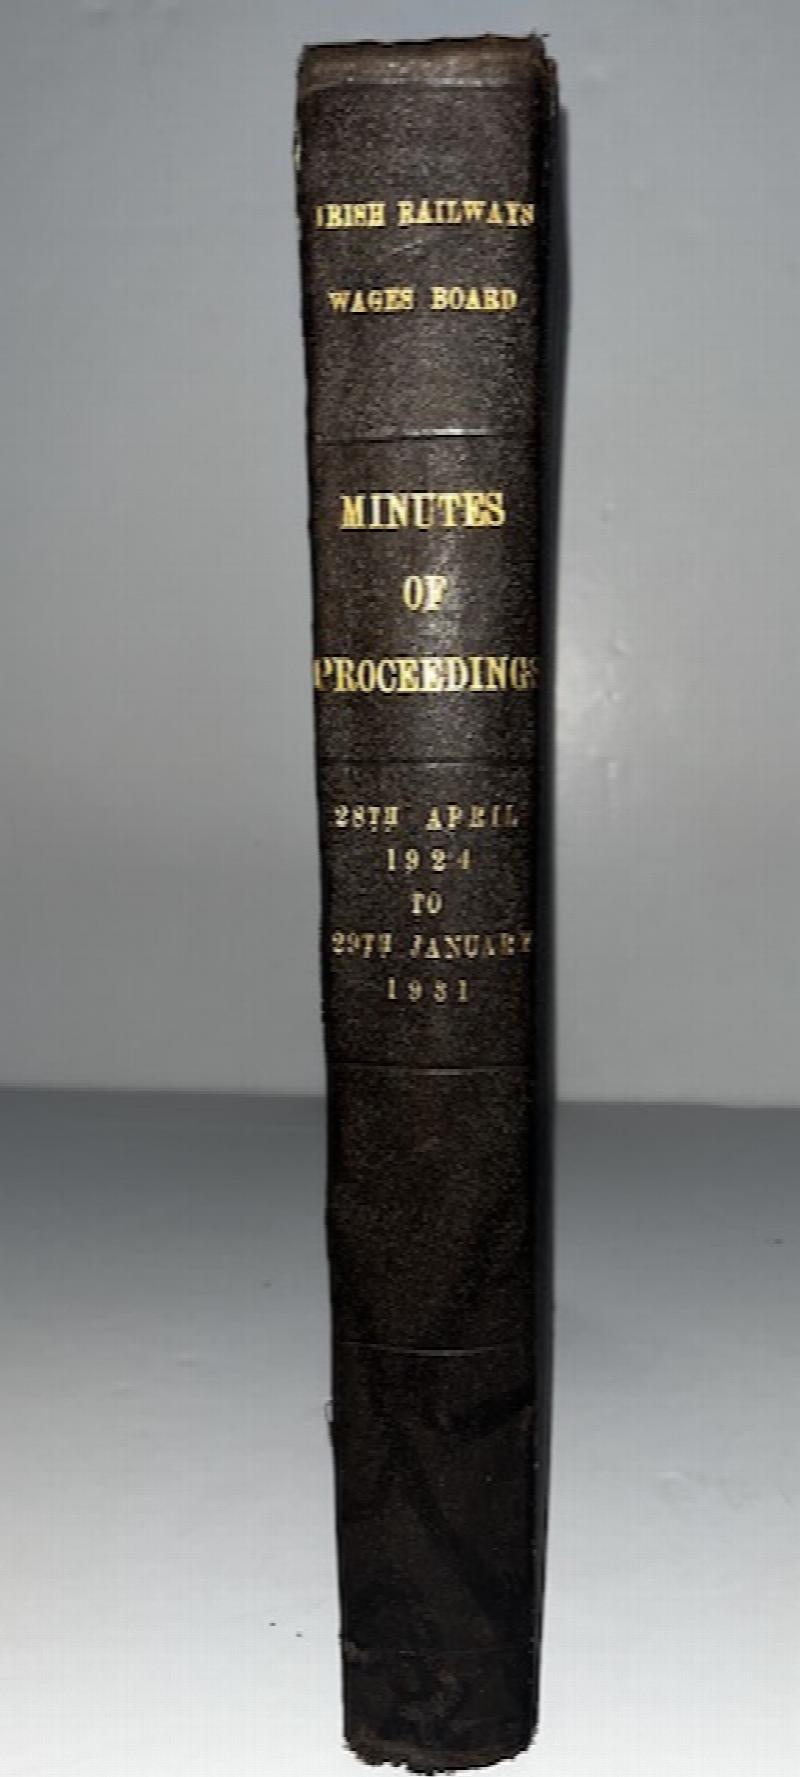 Image for Irish Railways Wages Board: Minutes Of Proceedings, 28th April 1924 To 29th January 1931